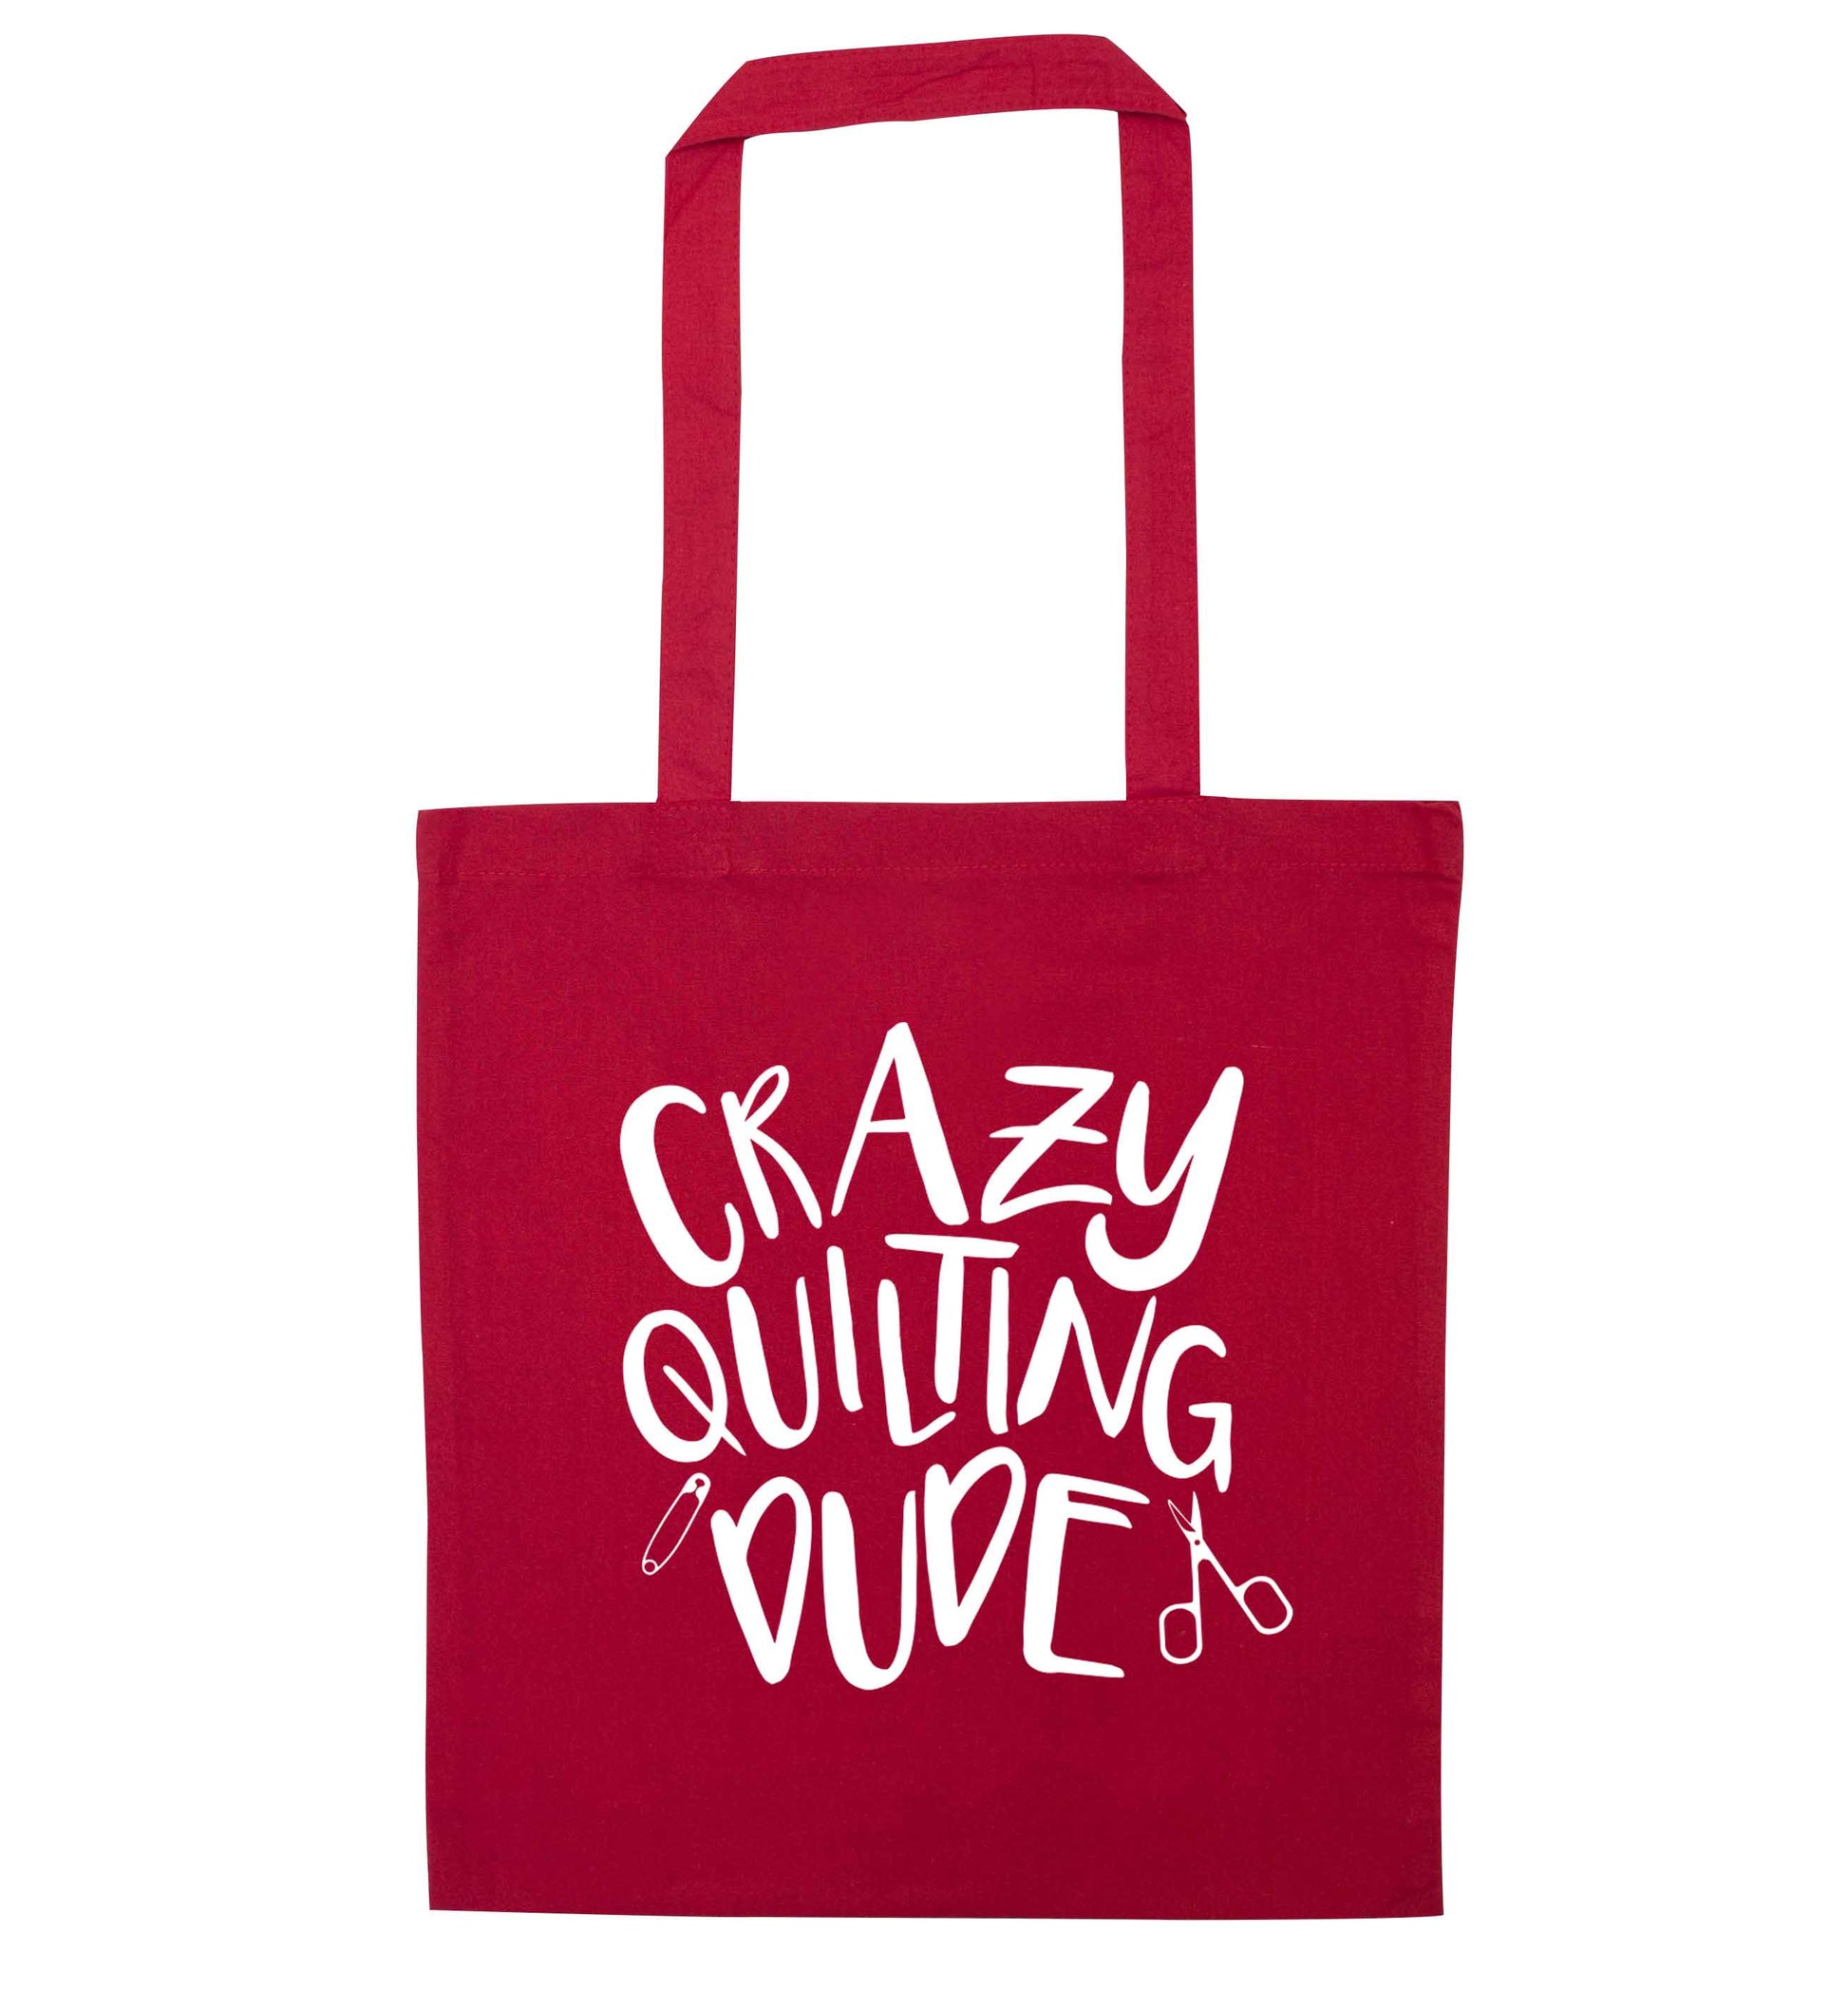 Crazy quilting dude red tote bag